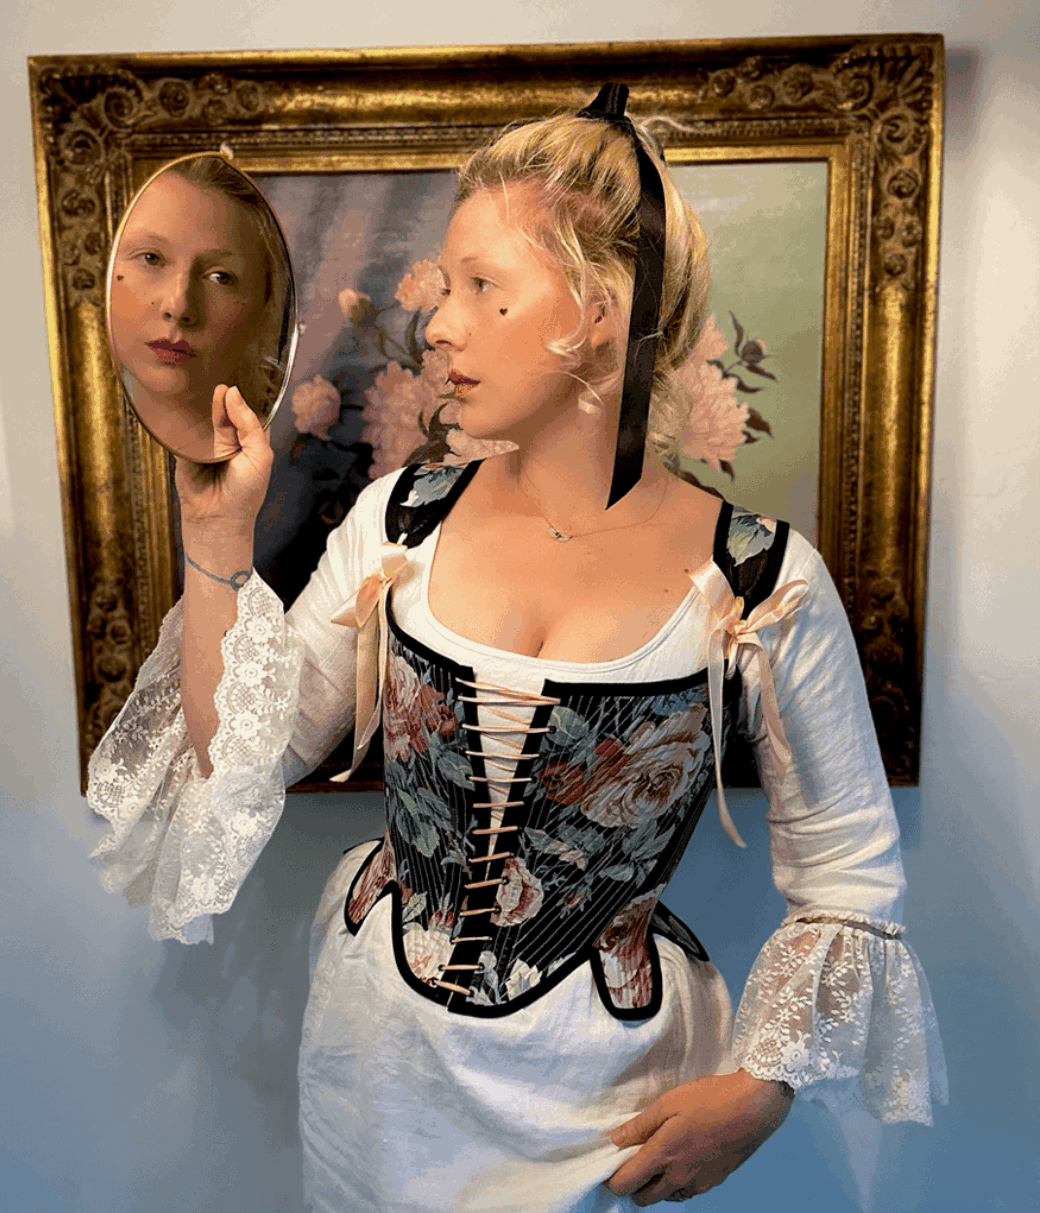 A person in a white shift and corset looks at their reflection in a handheld mirror